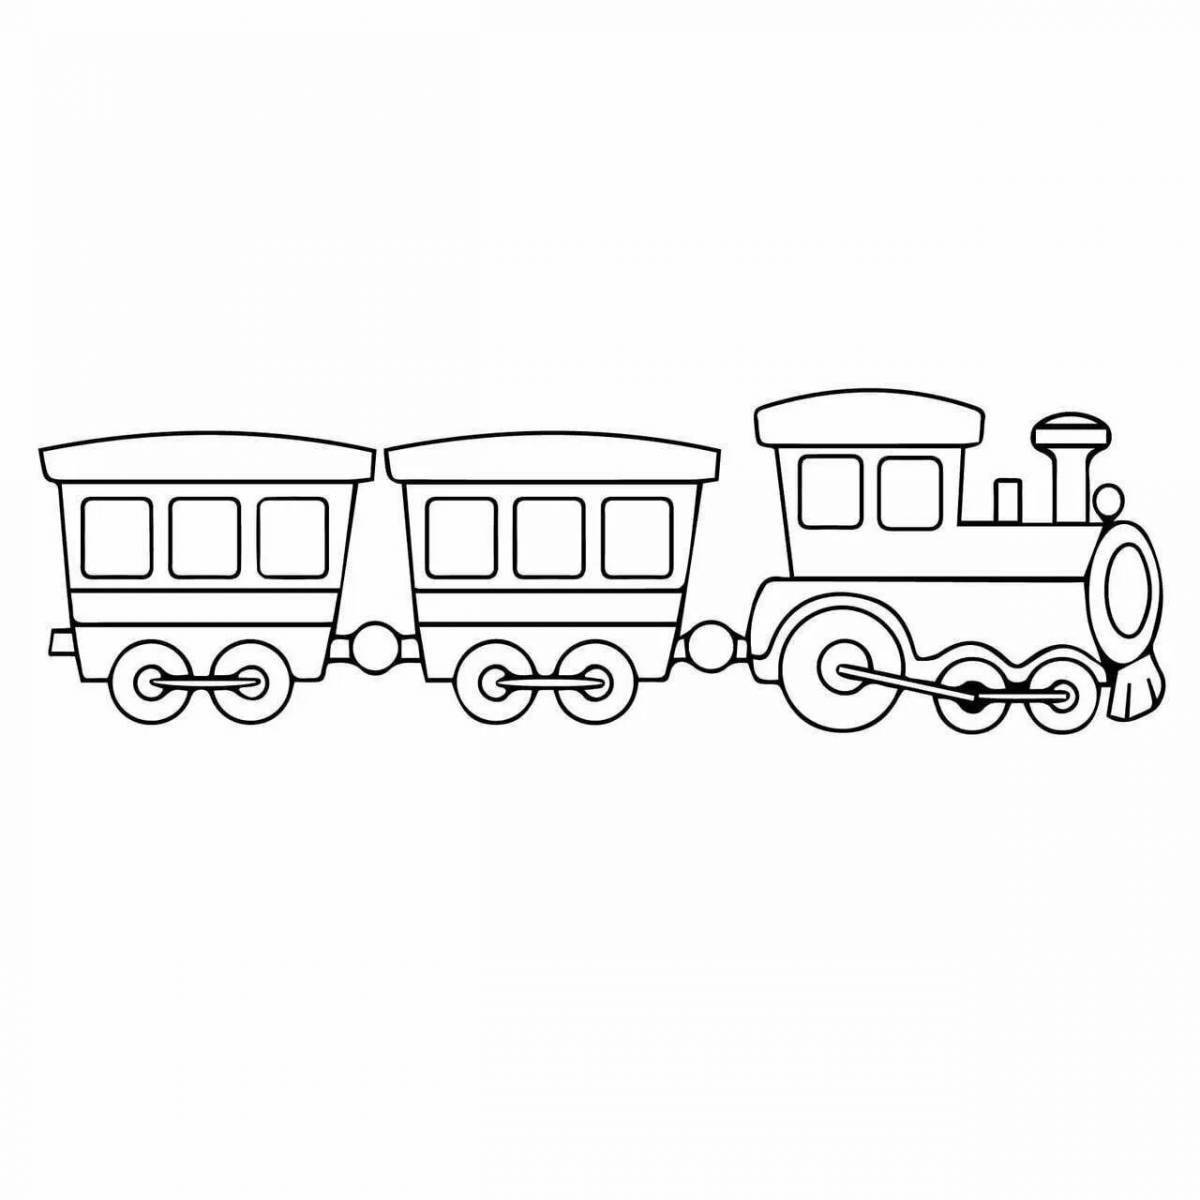 Gorgeous train trailer coloring page